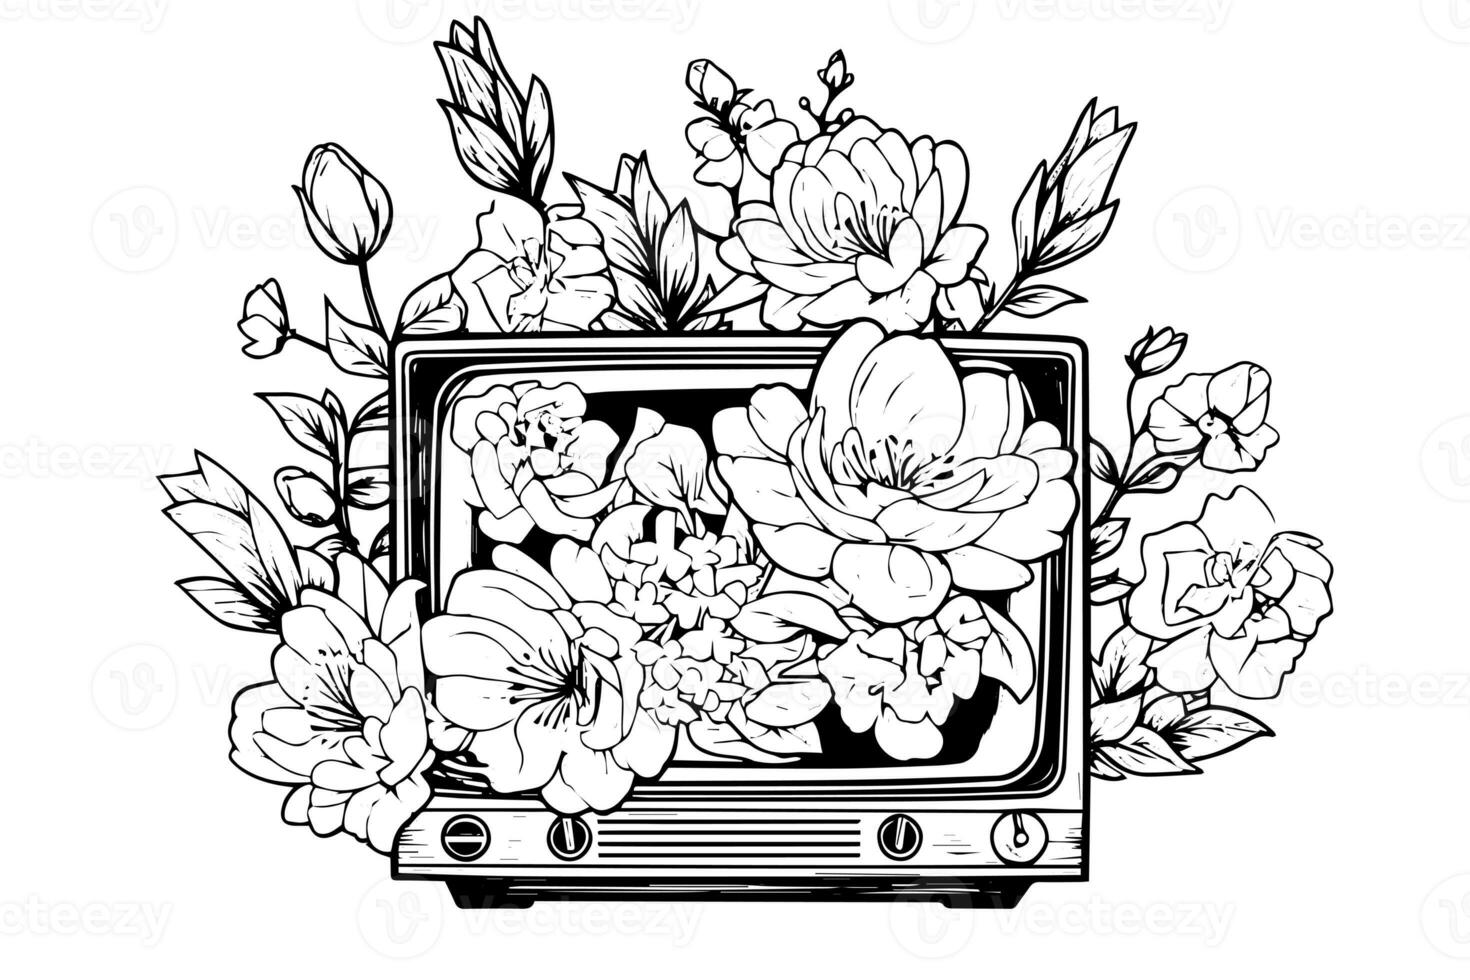 Retro floral television vector illustration. Engraving style ink sketch. photo